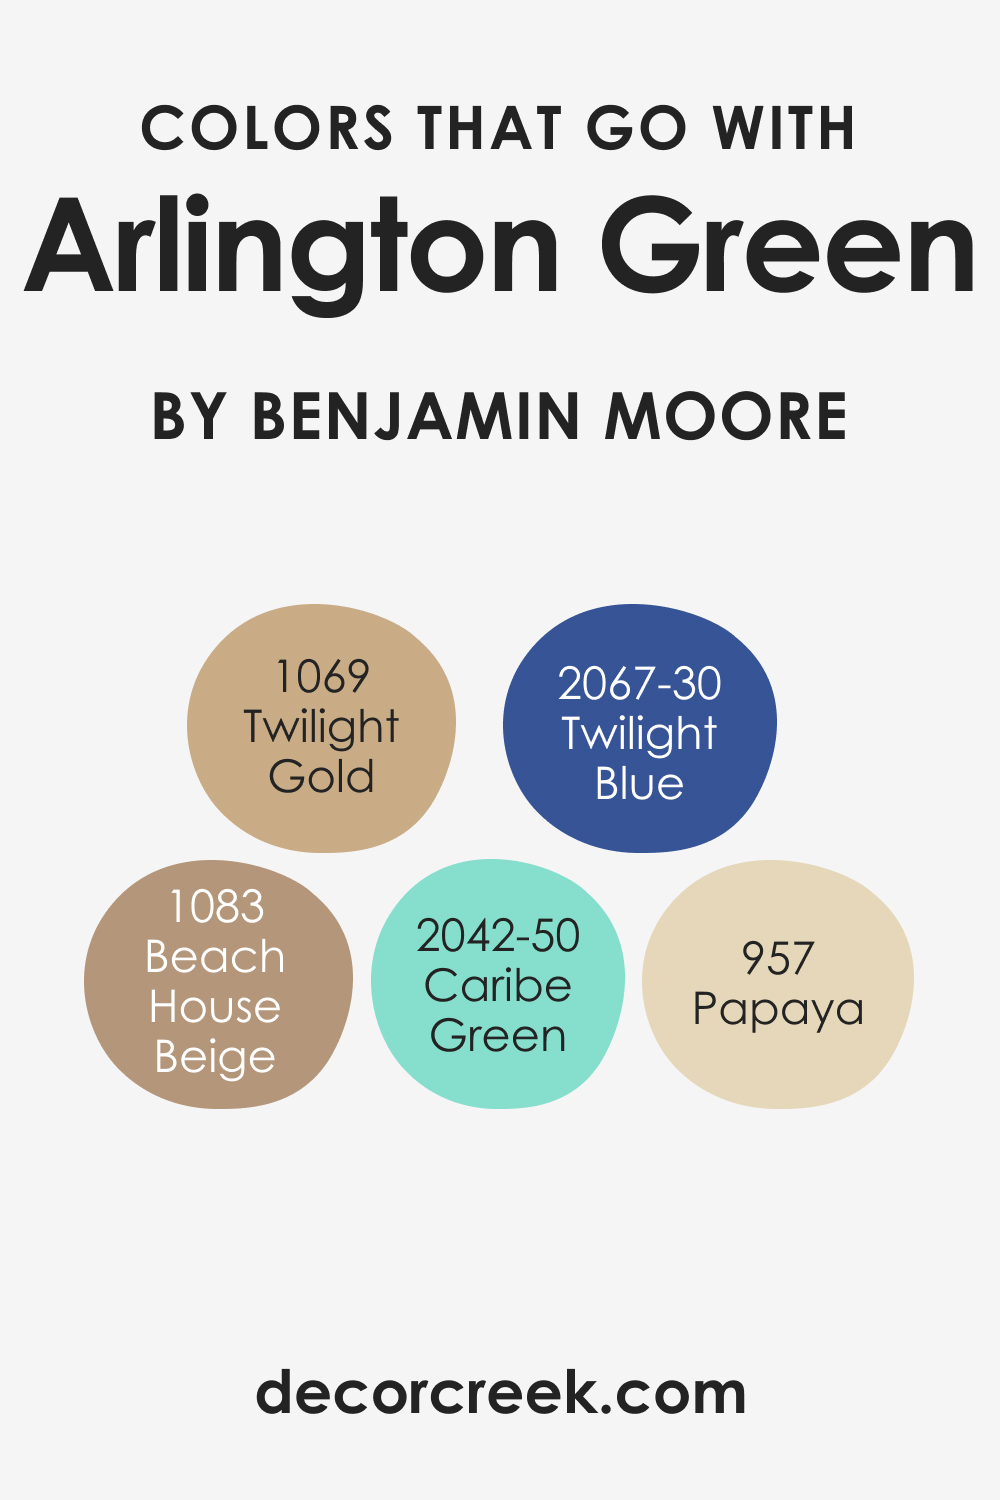 Colors That Go With Arlington Green 580